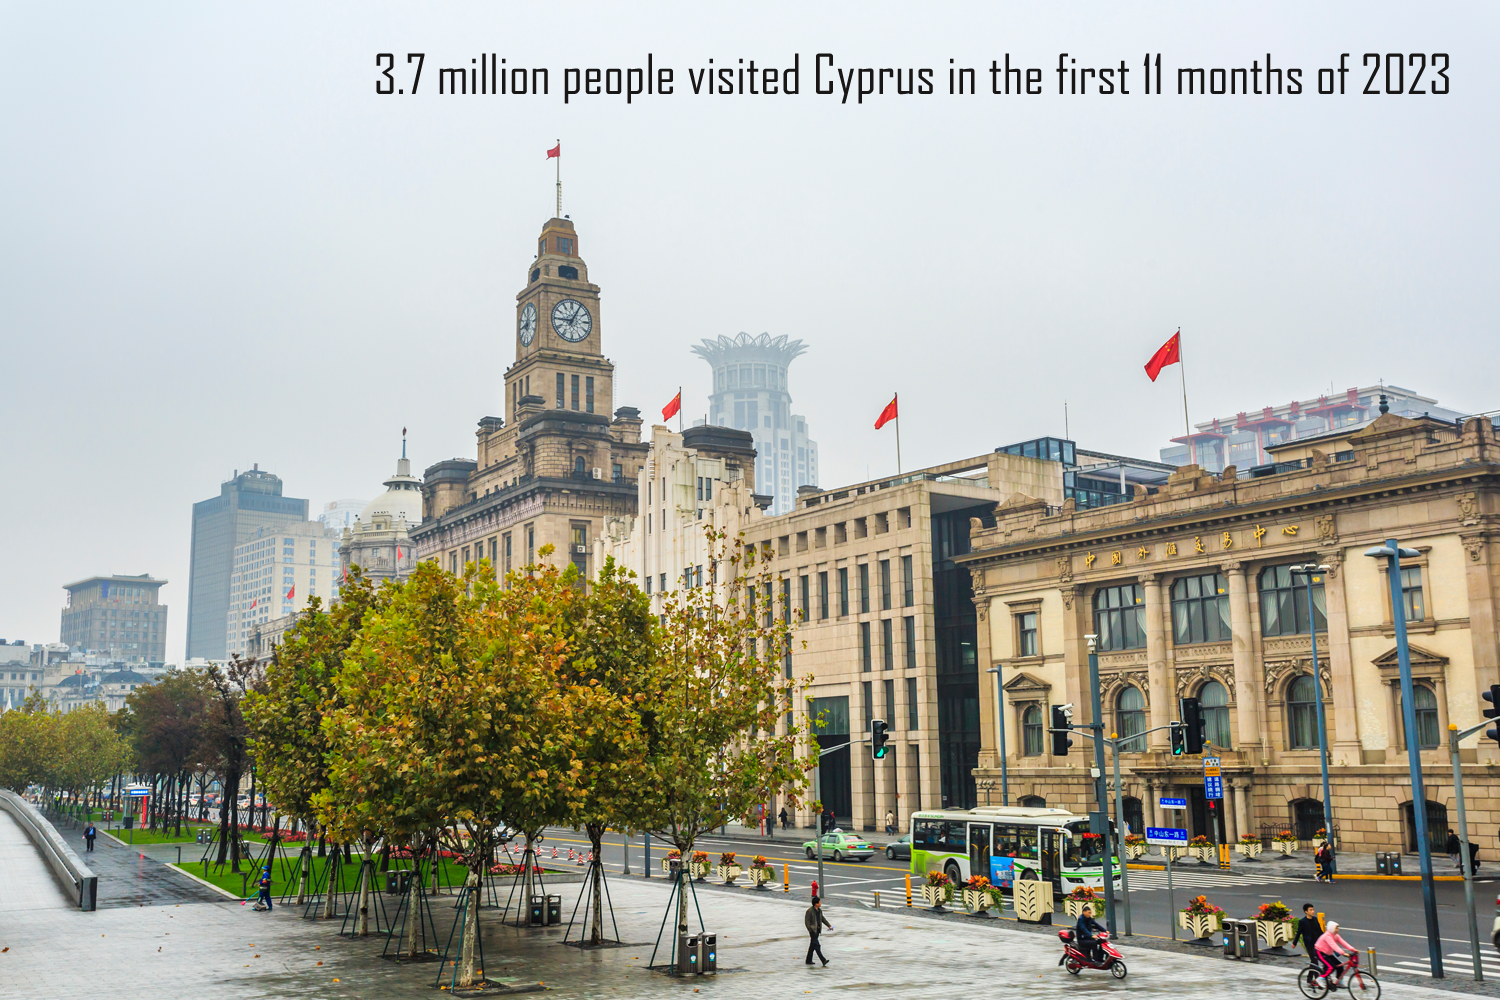 3.7 million people visited Cyprus in the first 11 months of 2023.